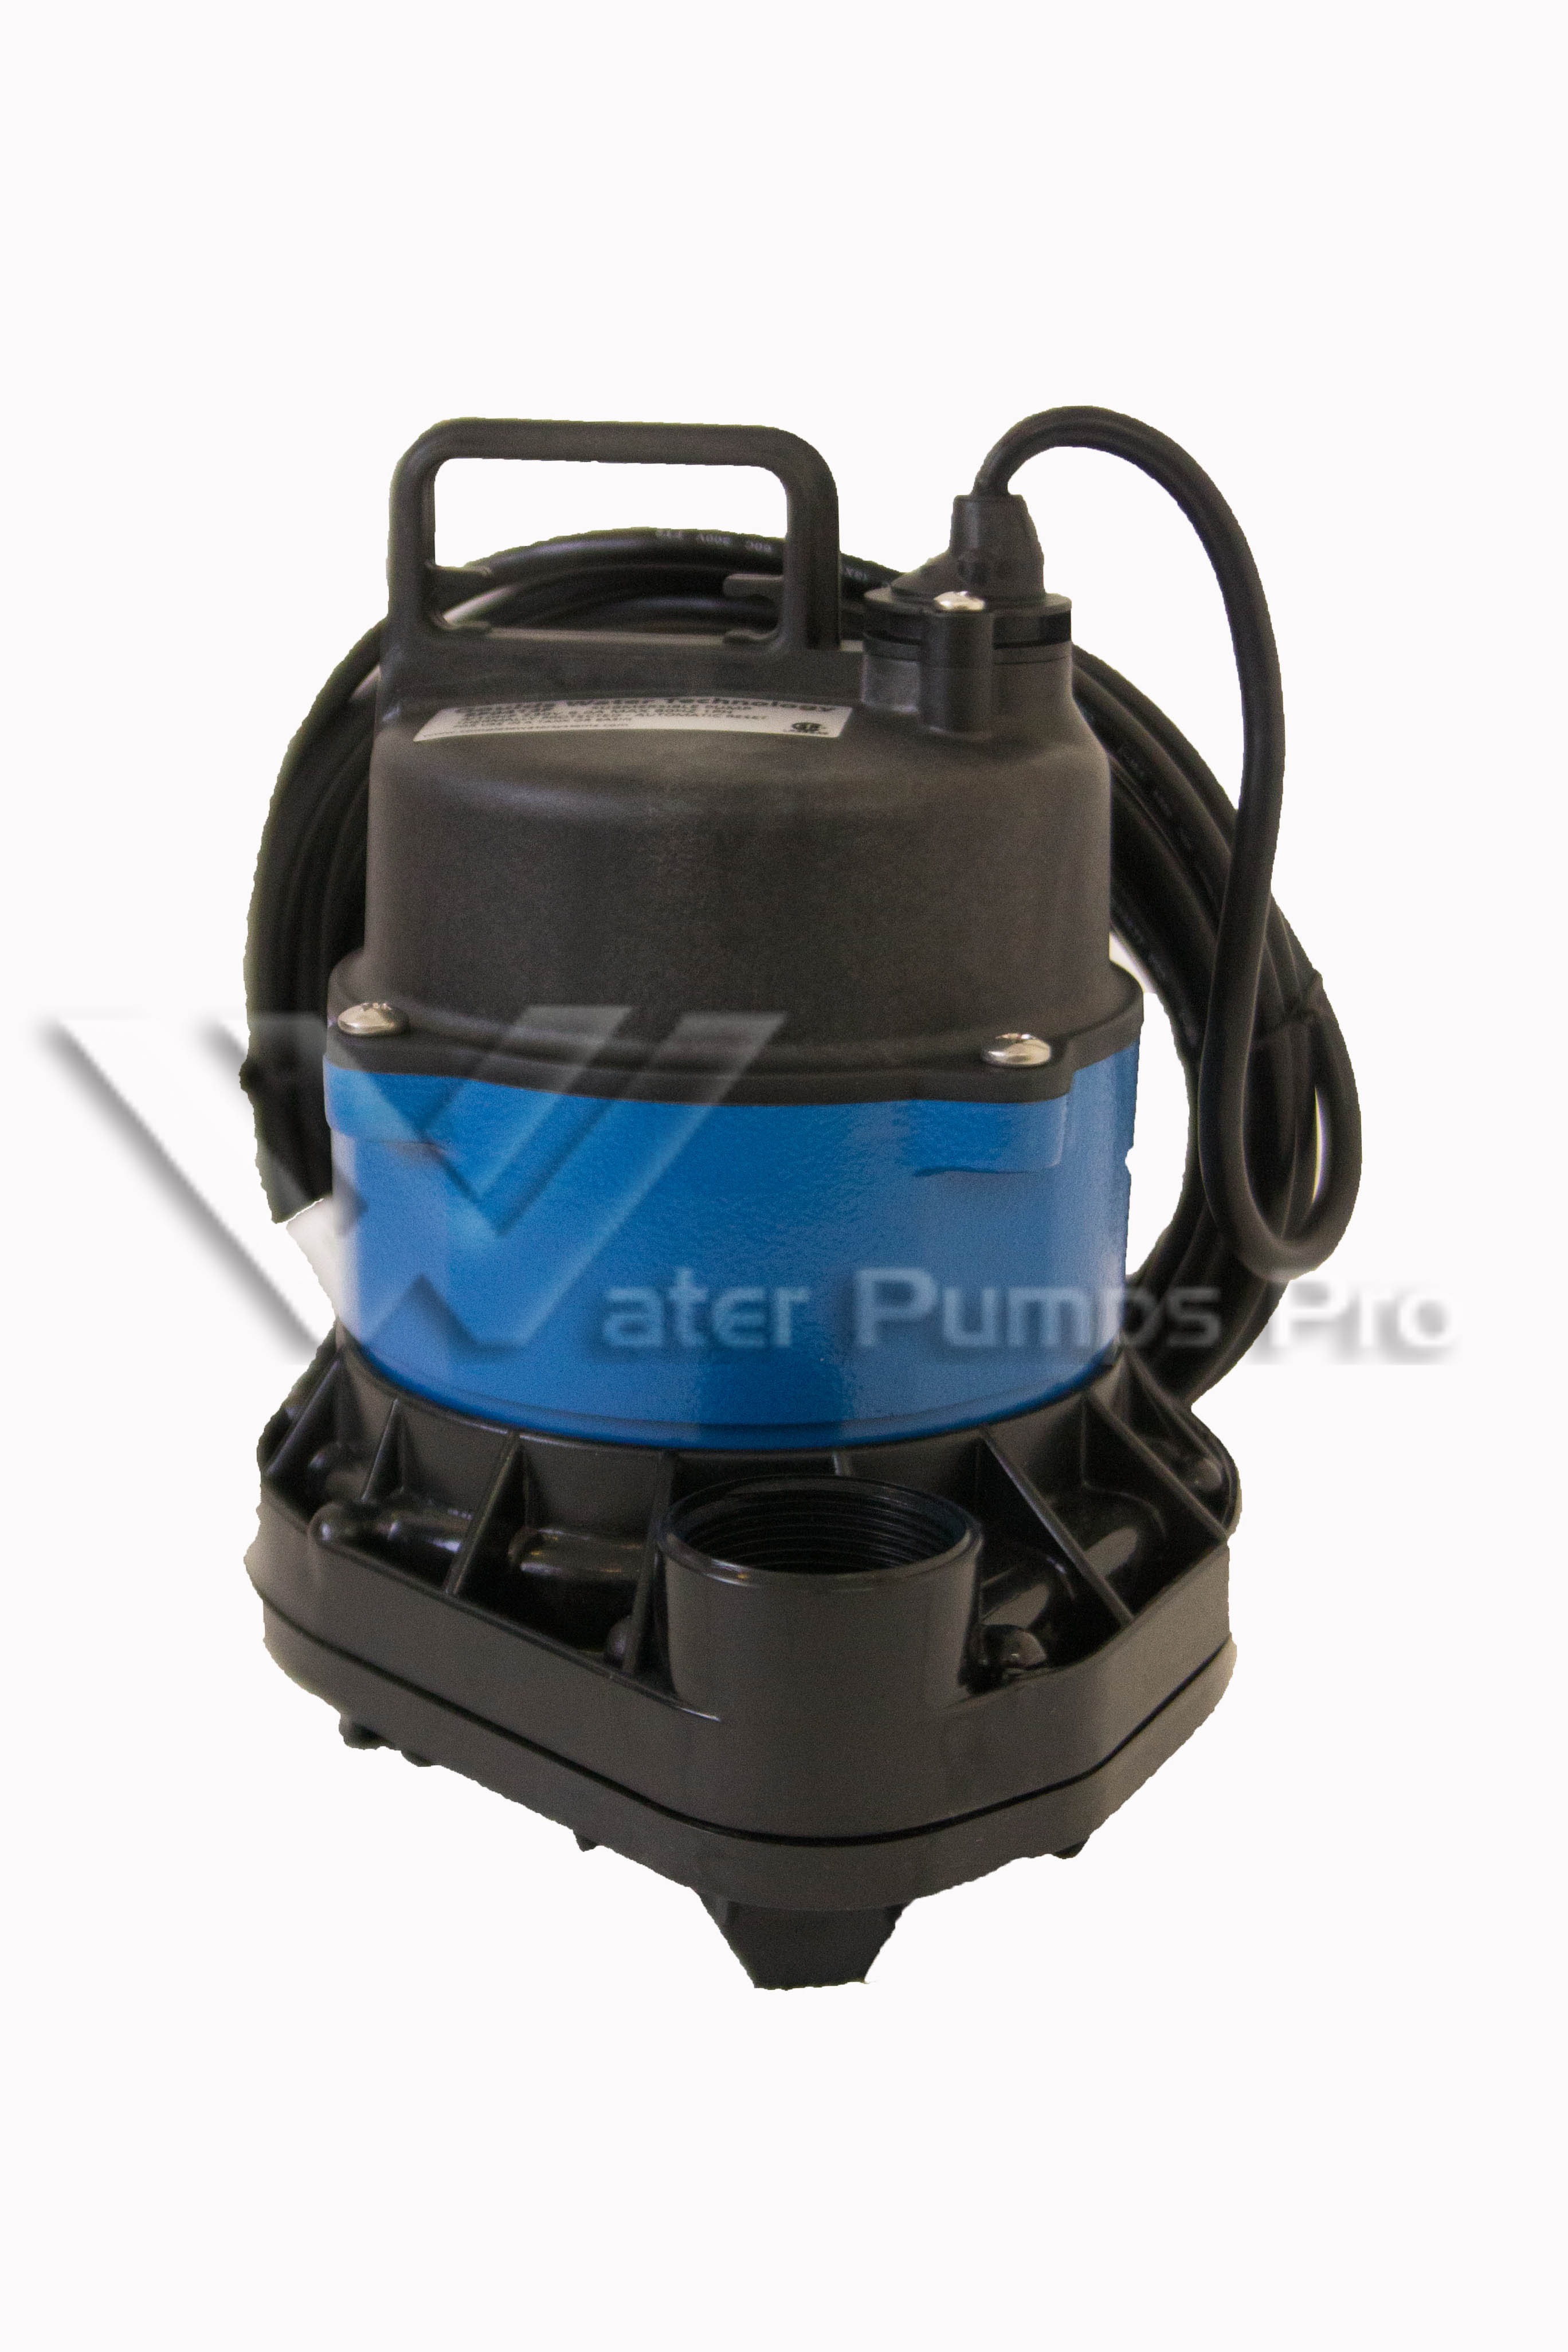 Goulds EP0412F 4/10HP 230V Submersible Effluent Pump - Click Image to Close